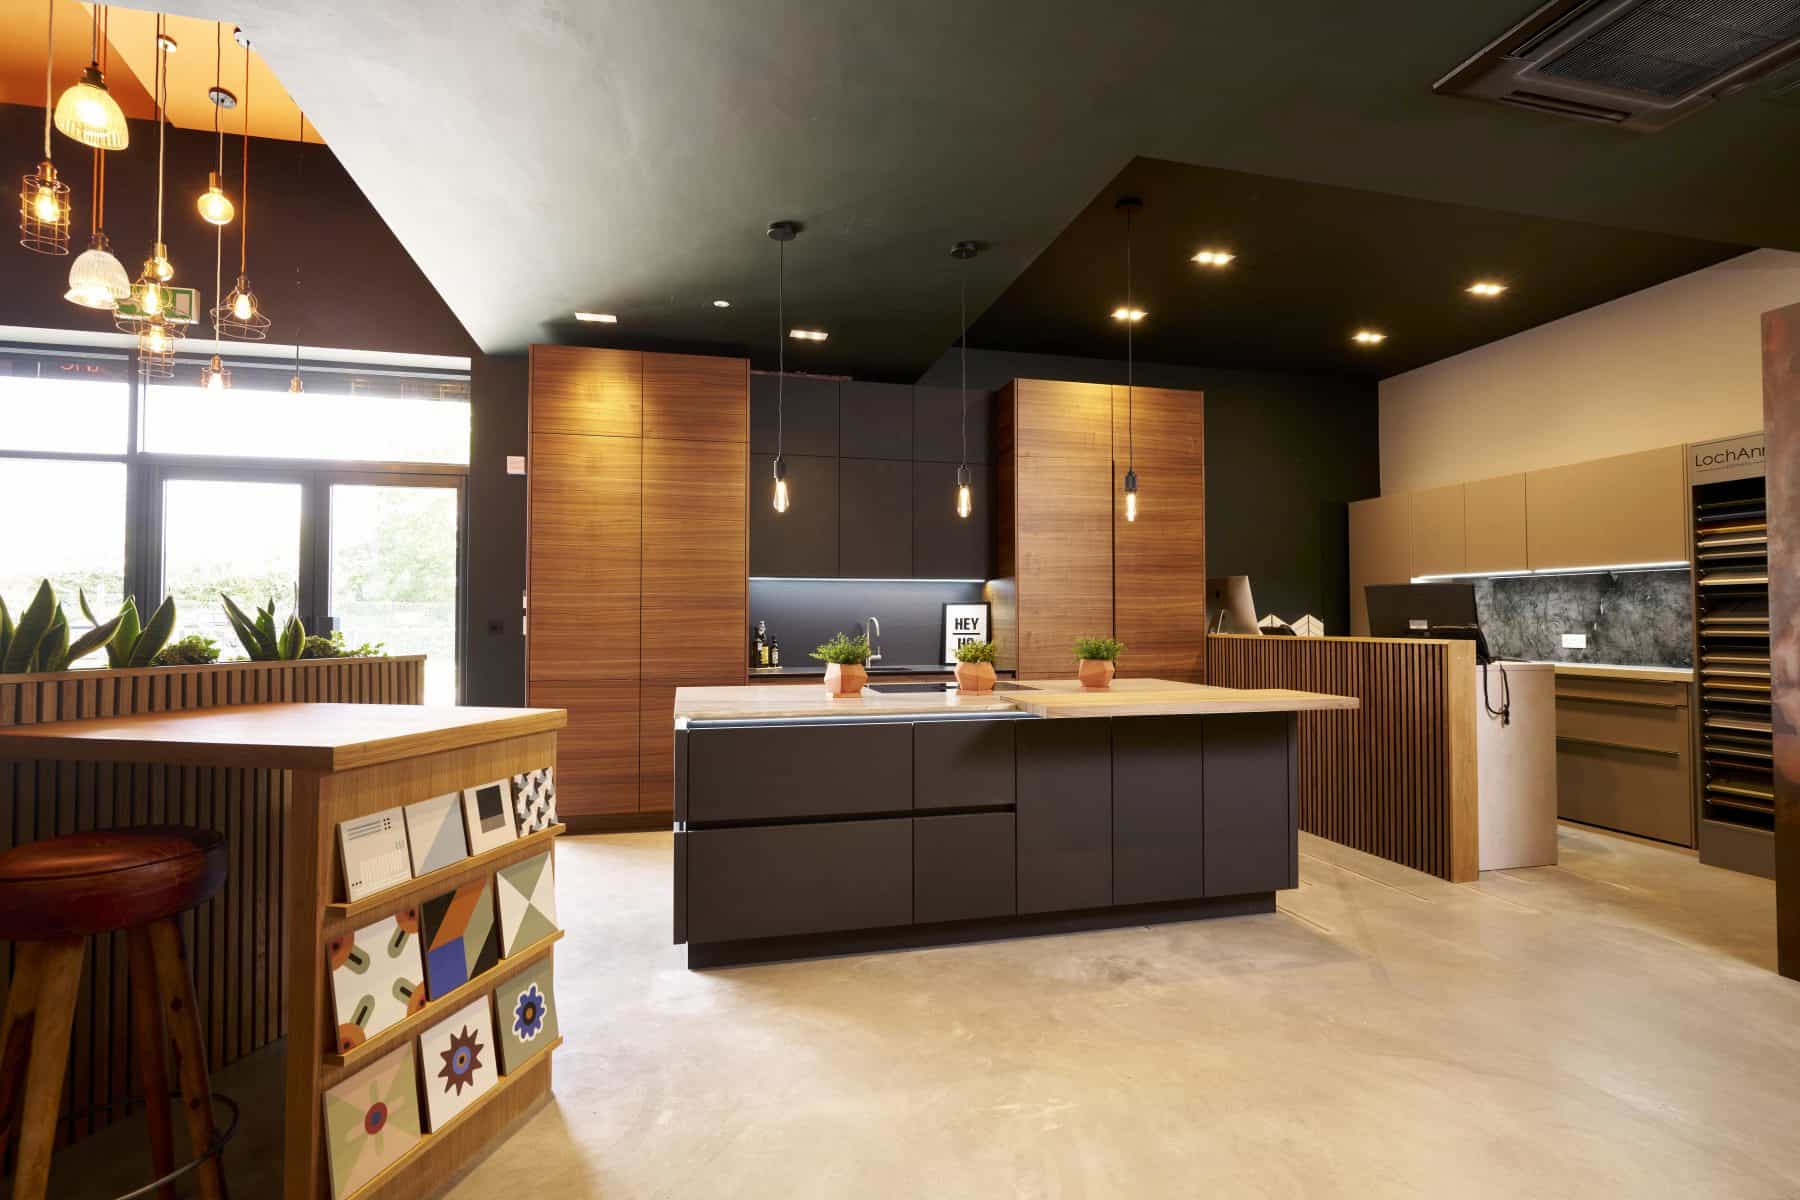 Contemporary kitchen with a mix of dark grey and wooden cabinets, and a spacious island that is illuminated by pendant lights.